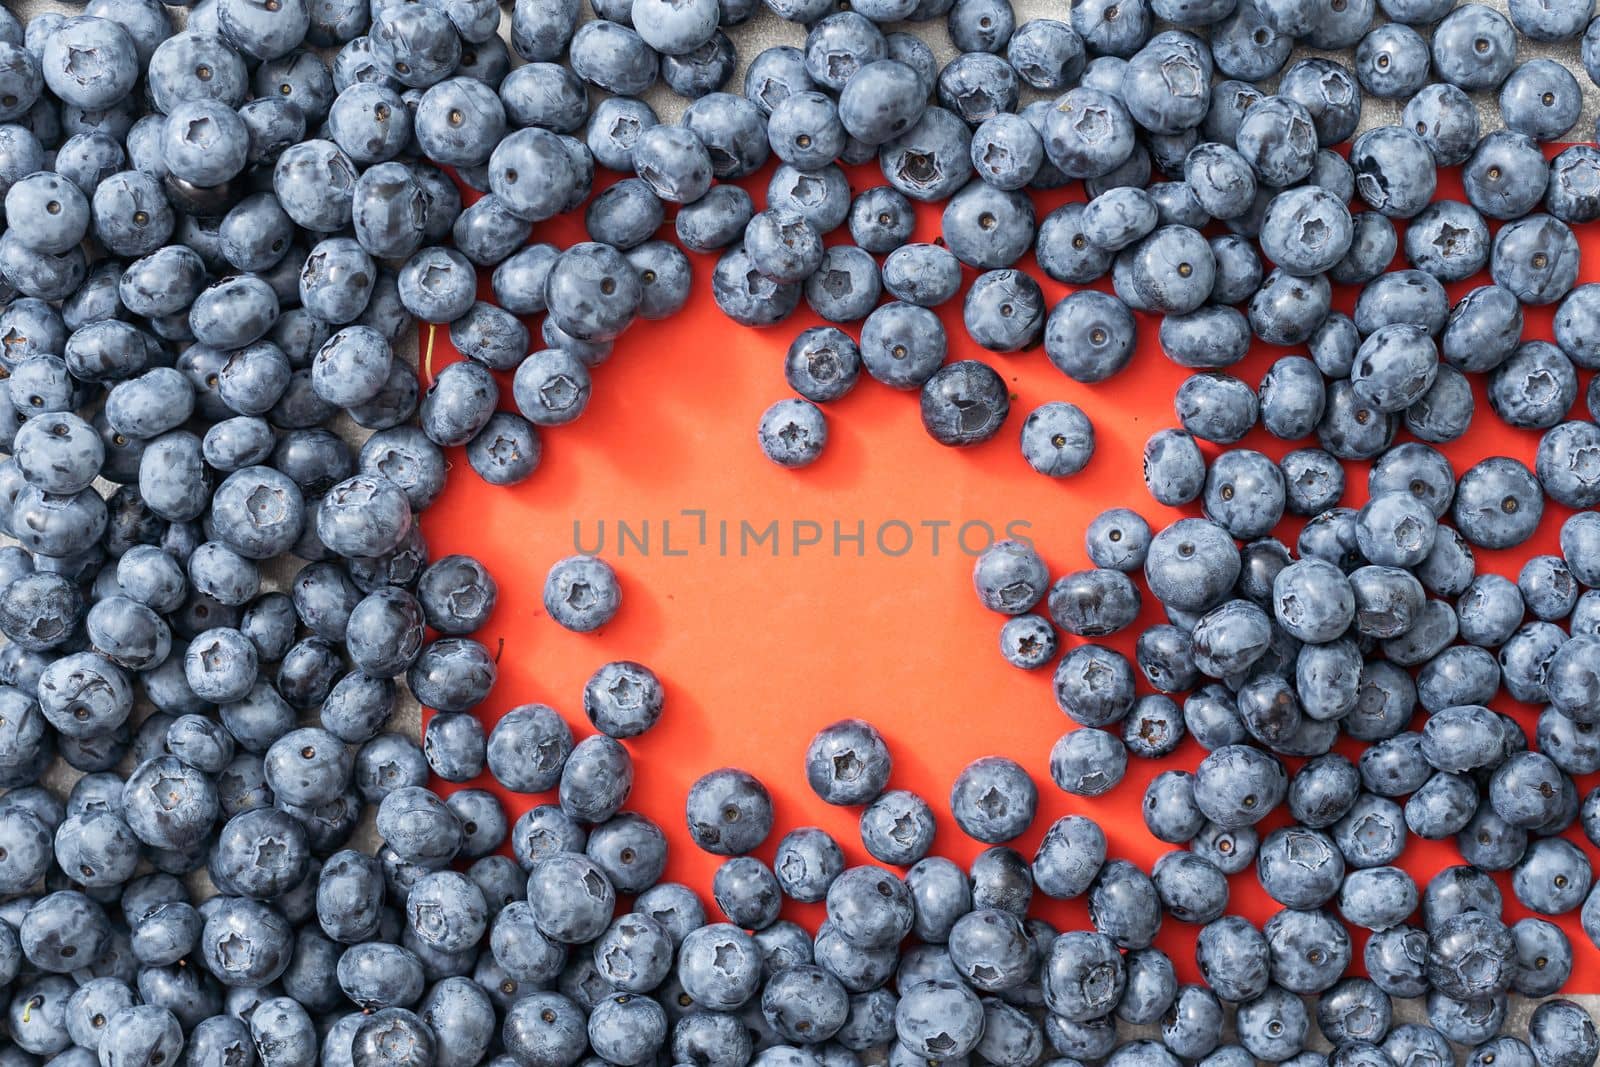 Large blueberries on a red background, close-up.